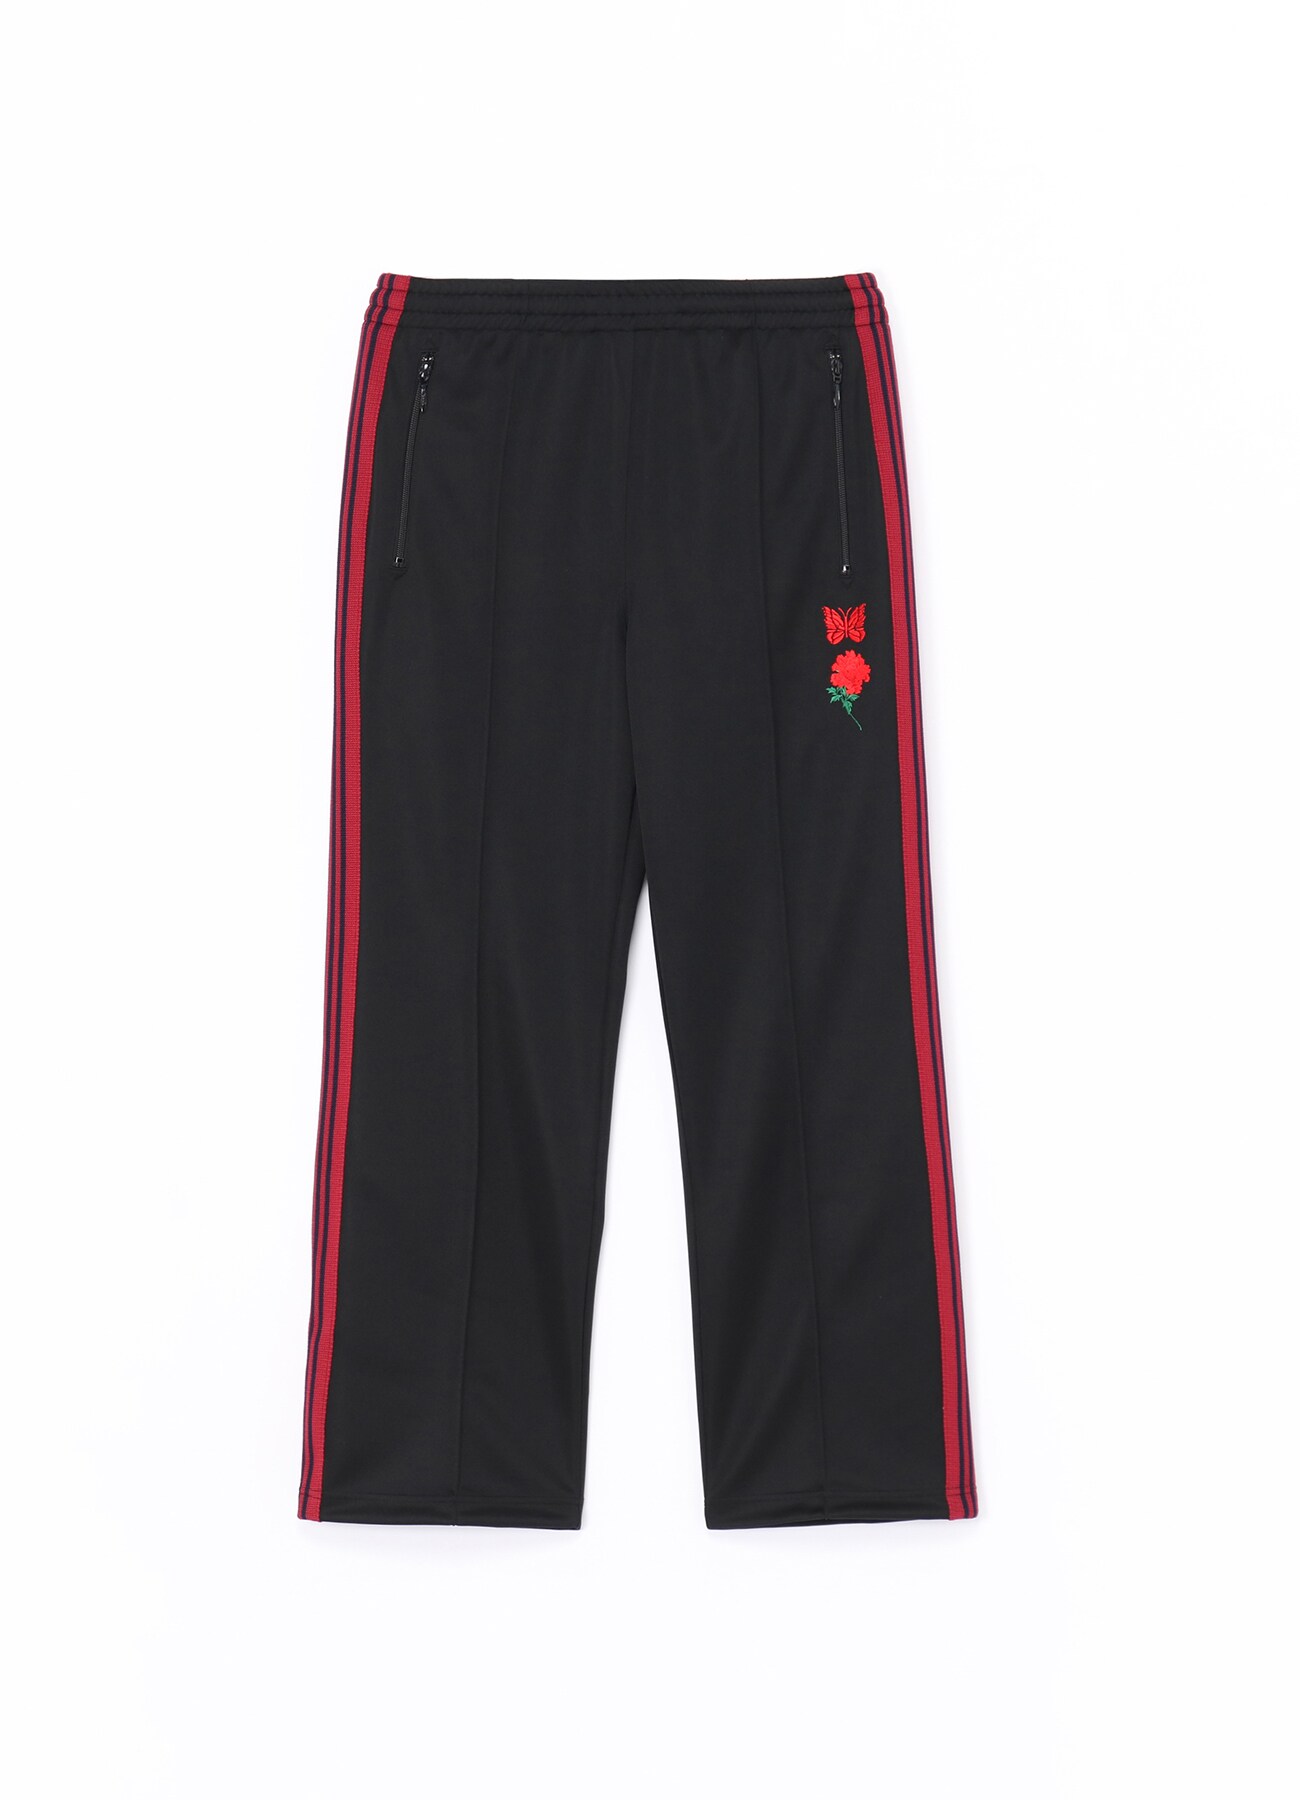 【12/28 12:00 Release】WILDSIDE × NEEDLES Narrow Track Pant (RED×NAVY)